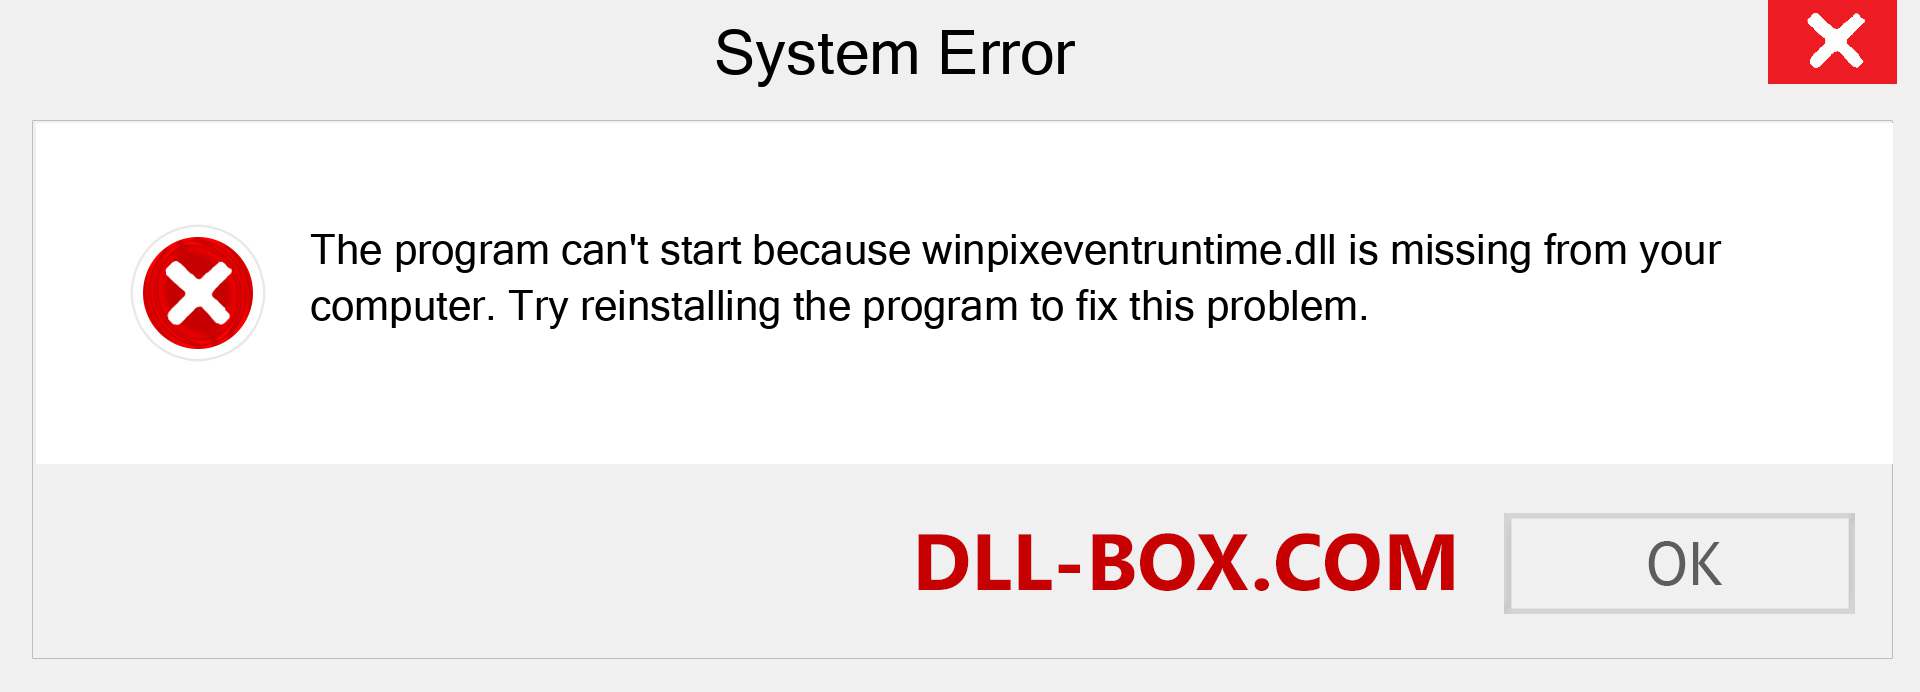  winpixeventruntime.dll file is missing?. Download for Windows 7, 8, 10 - Fix  winpixeventruntime dll Missing Error on Windows, photos, images